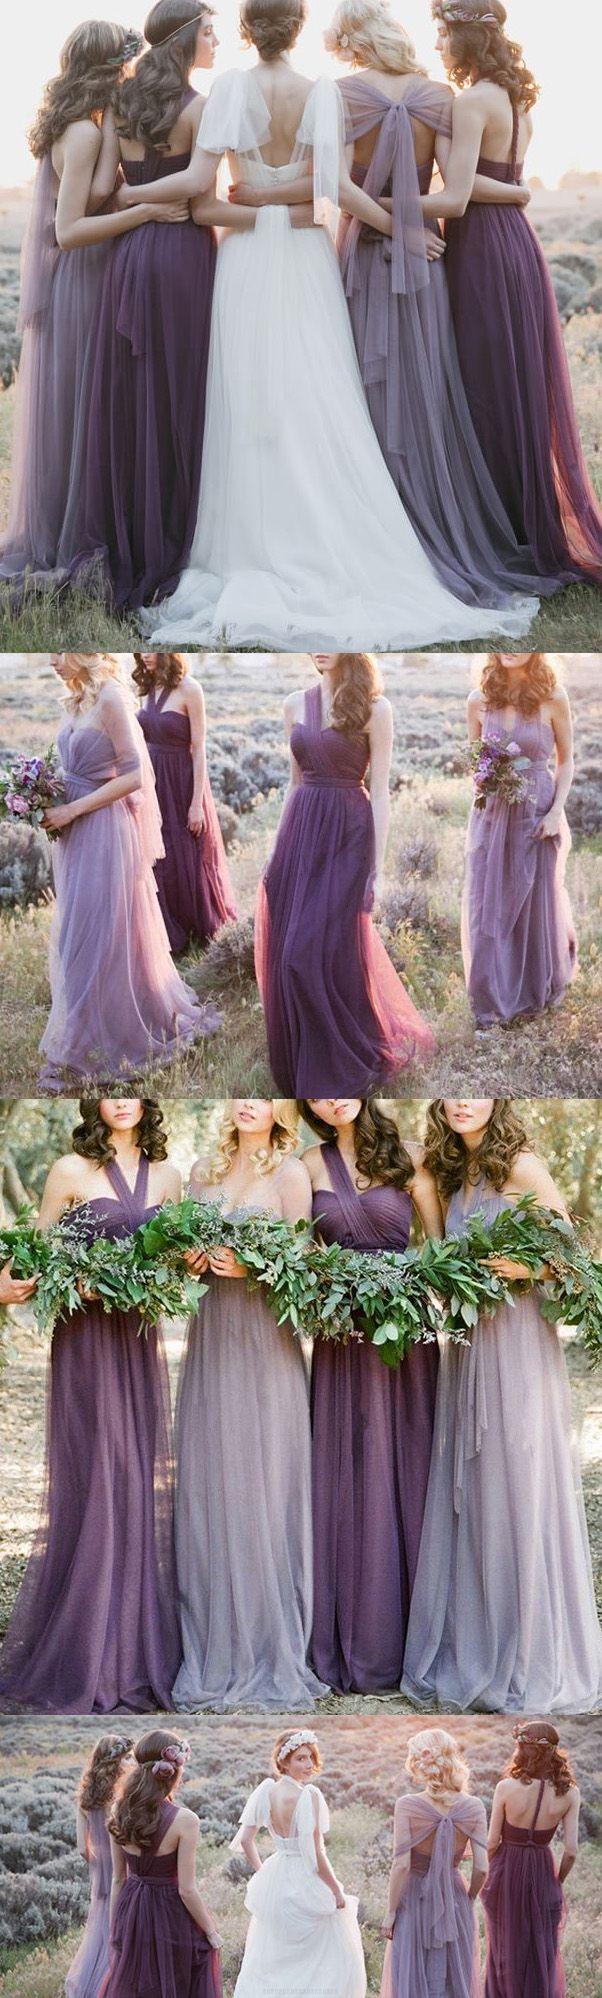 long bridesmaid dresses with boots - 61 